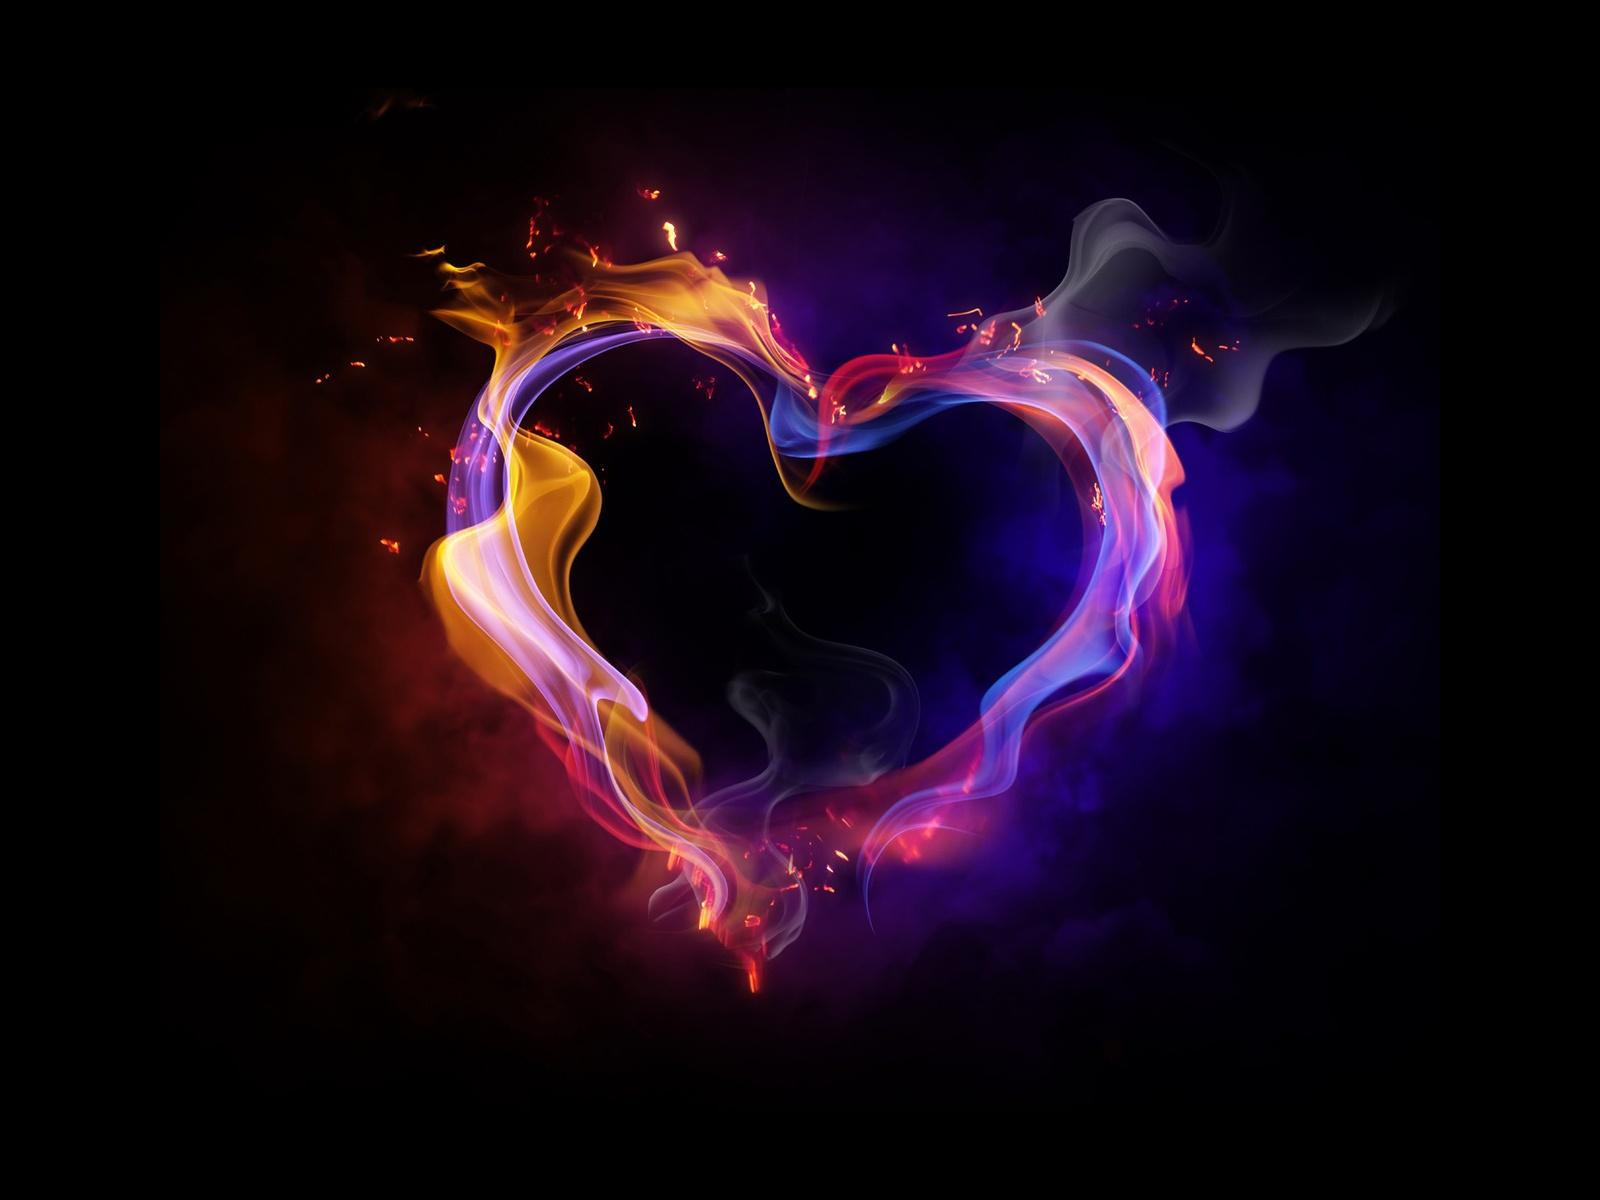 You Heart HD Wallpaper I Image Valentine S Day